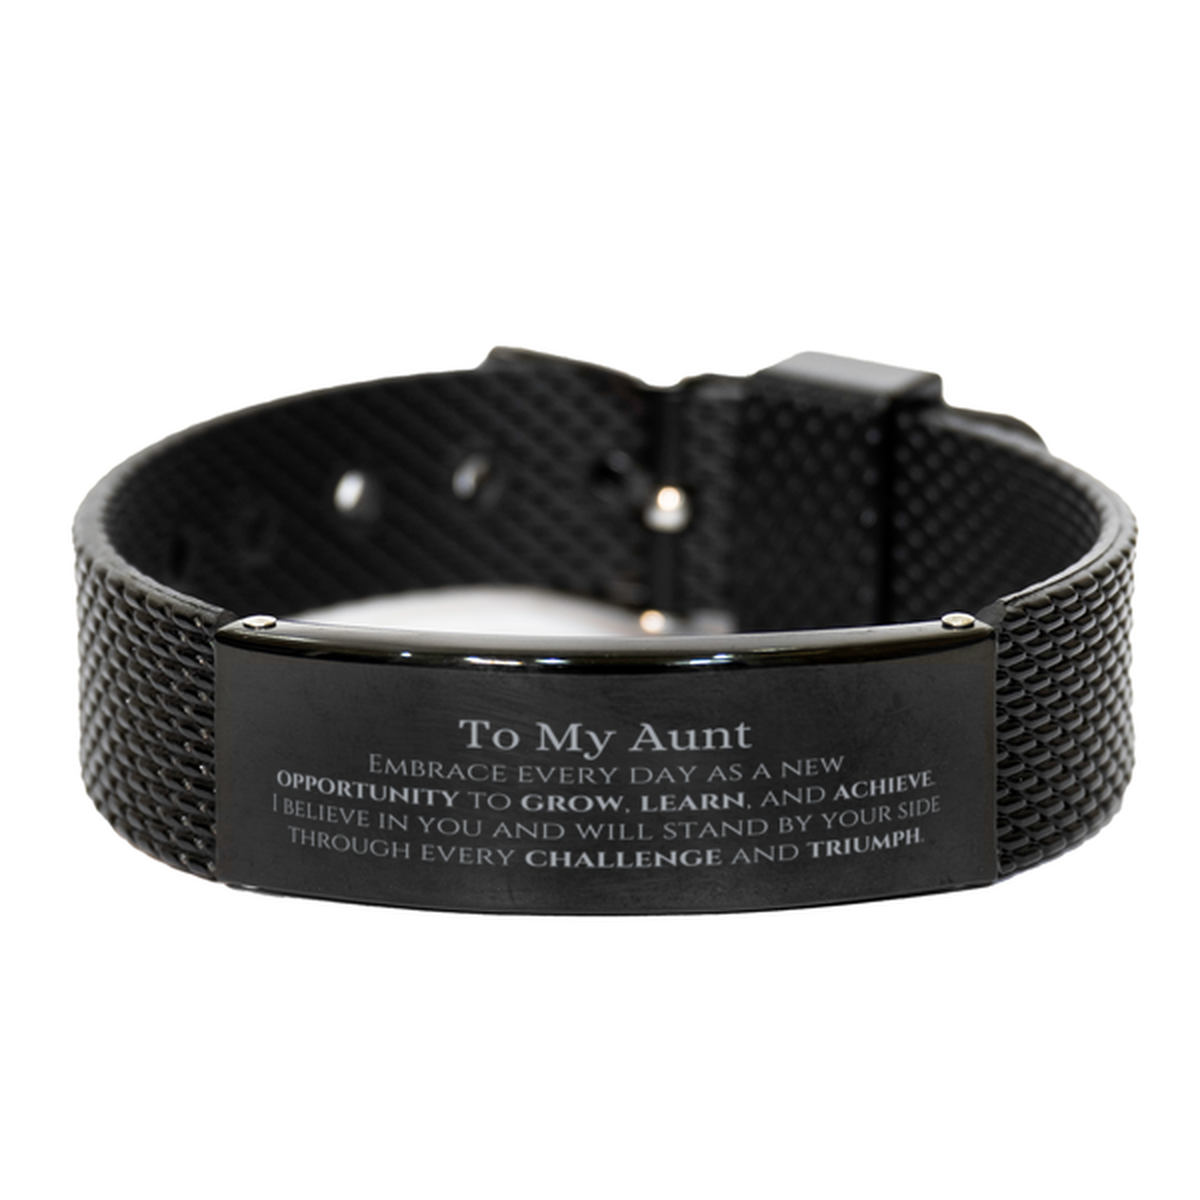 To My Aunt Gifts, I believe in you and will stand by your side, Inspirational Black Shark Mesh Bracelet For Aunt, Birthday Christmas Motivational Aunt Gifts